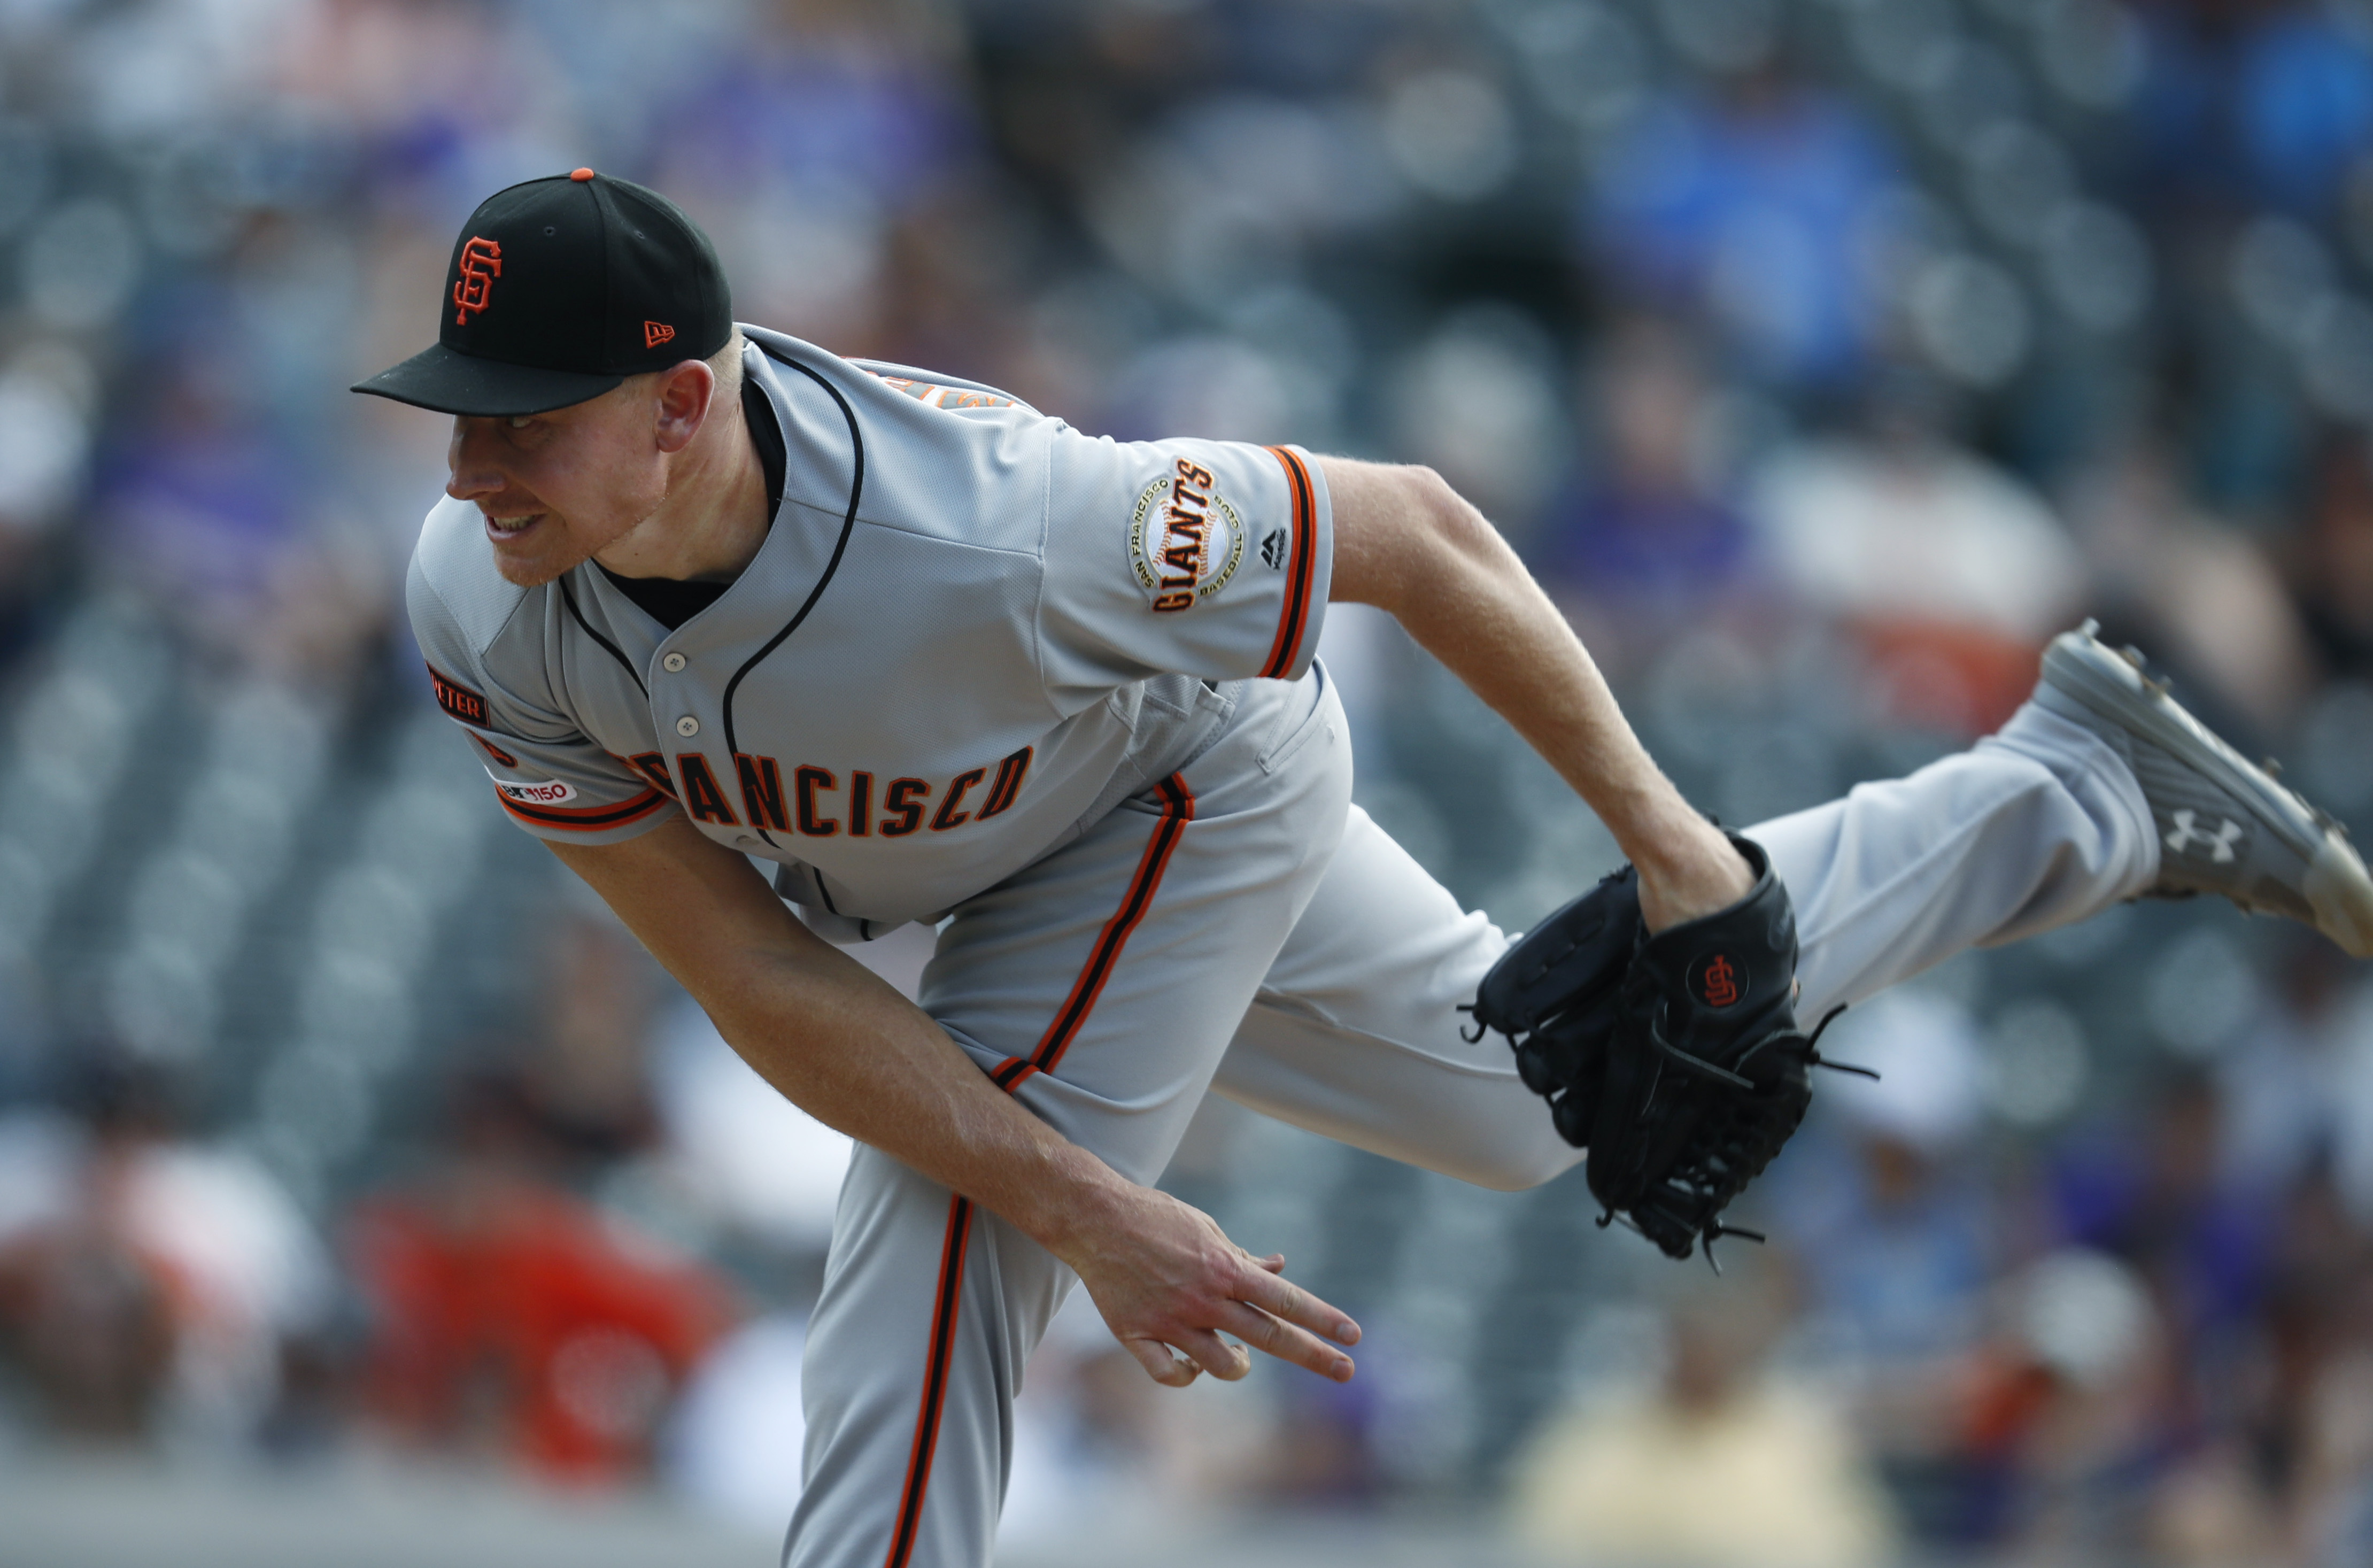 Giants trade reliever Melancon to Braves for 2 pitchers